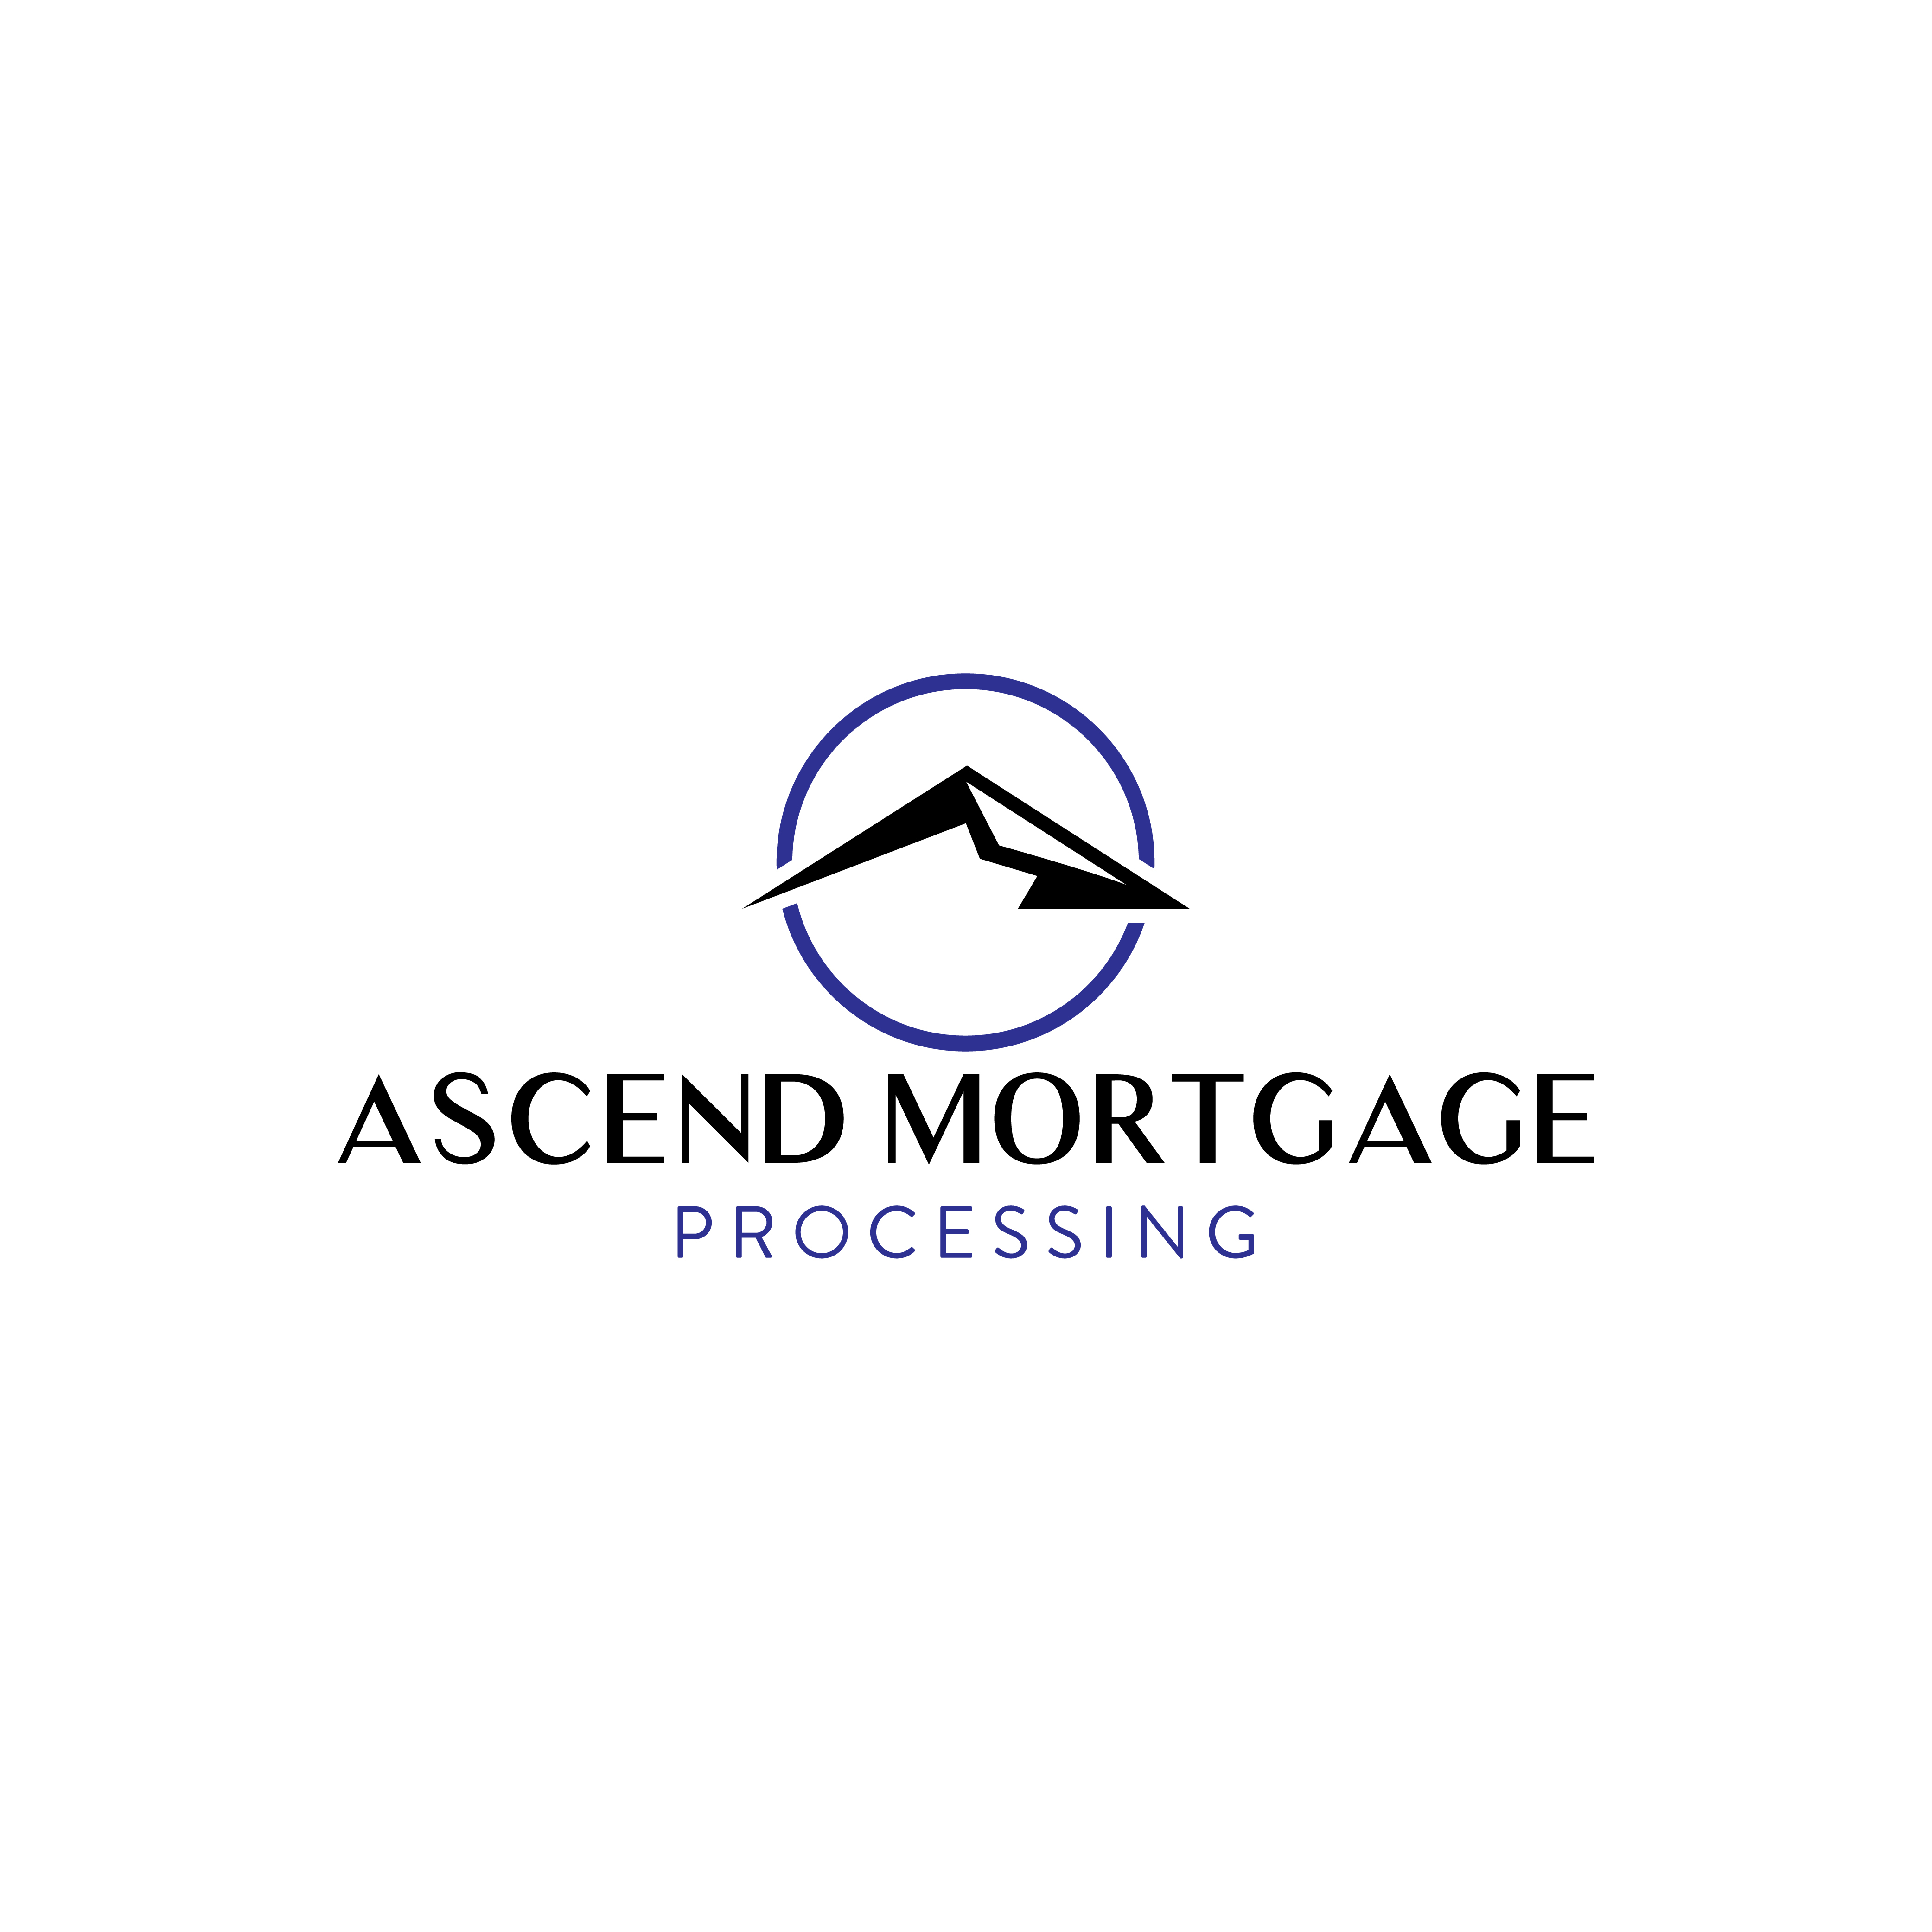 Ascend-Mortgage-Processing Marketplace